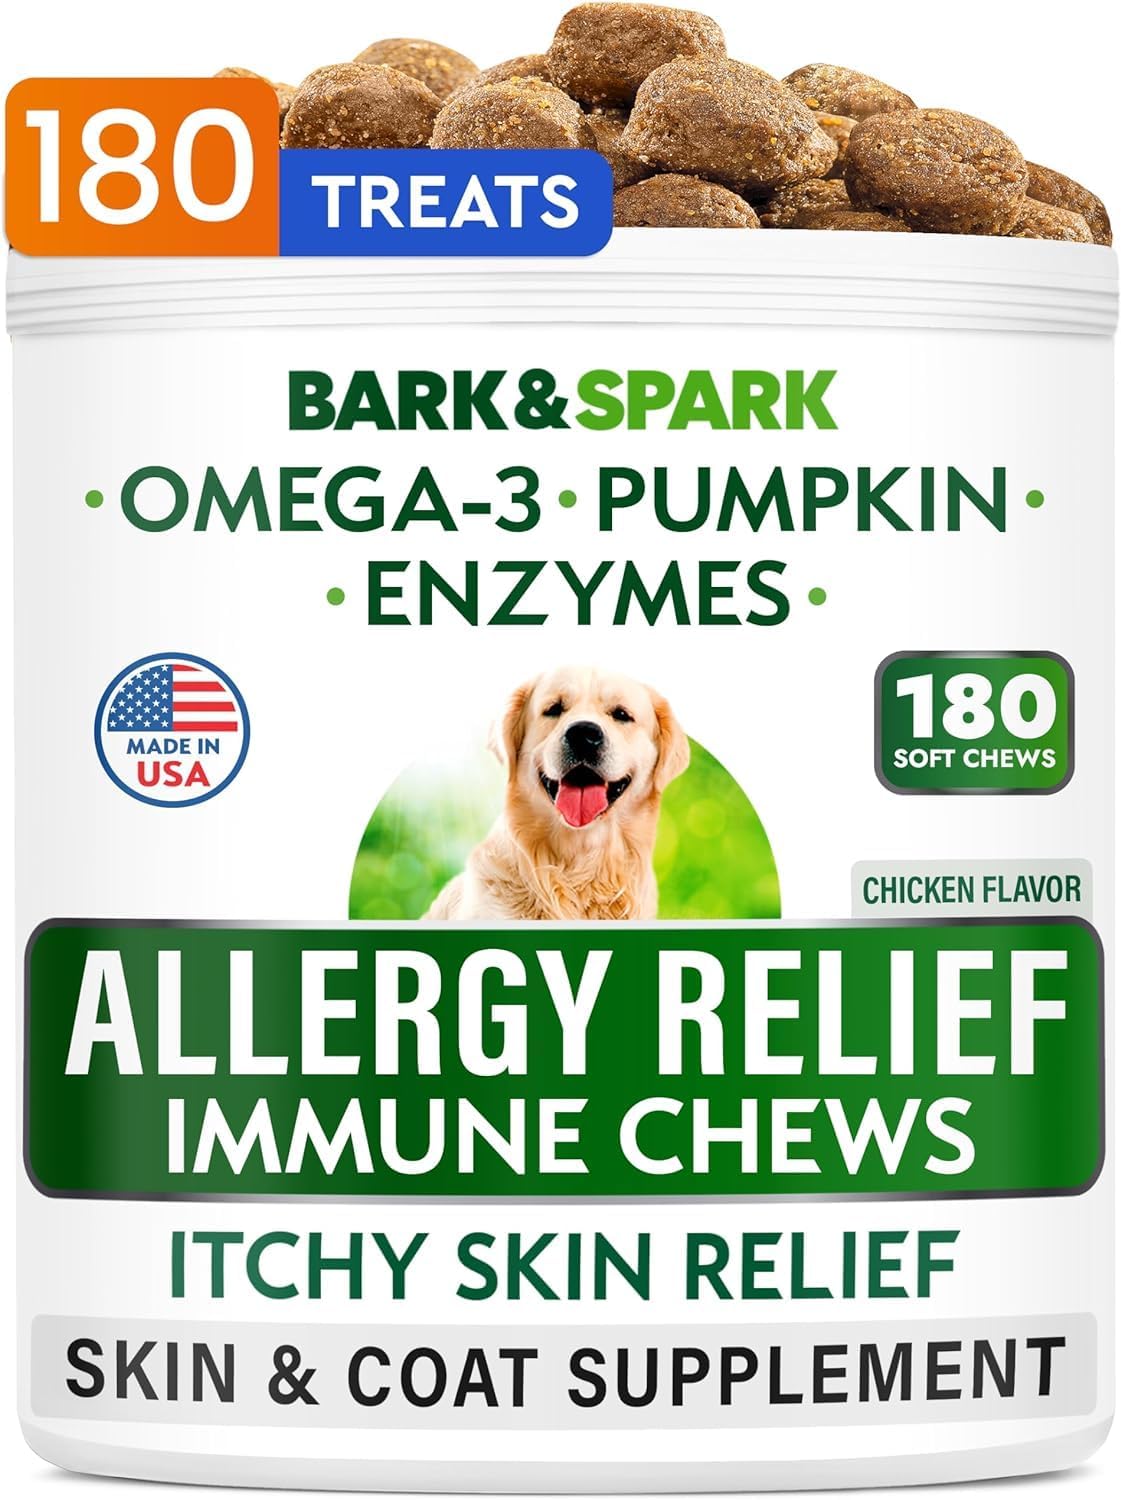 BARK&SPARK Dog Allergy Relief Chews (180 Immune Treats) - Anti-Itch Skin & Coat Supplement - Omega 3 Fish Oil - Itchy Skin Relief Treatment Pills - Itching&Paw Licking - Dry Skin & Hot Spots